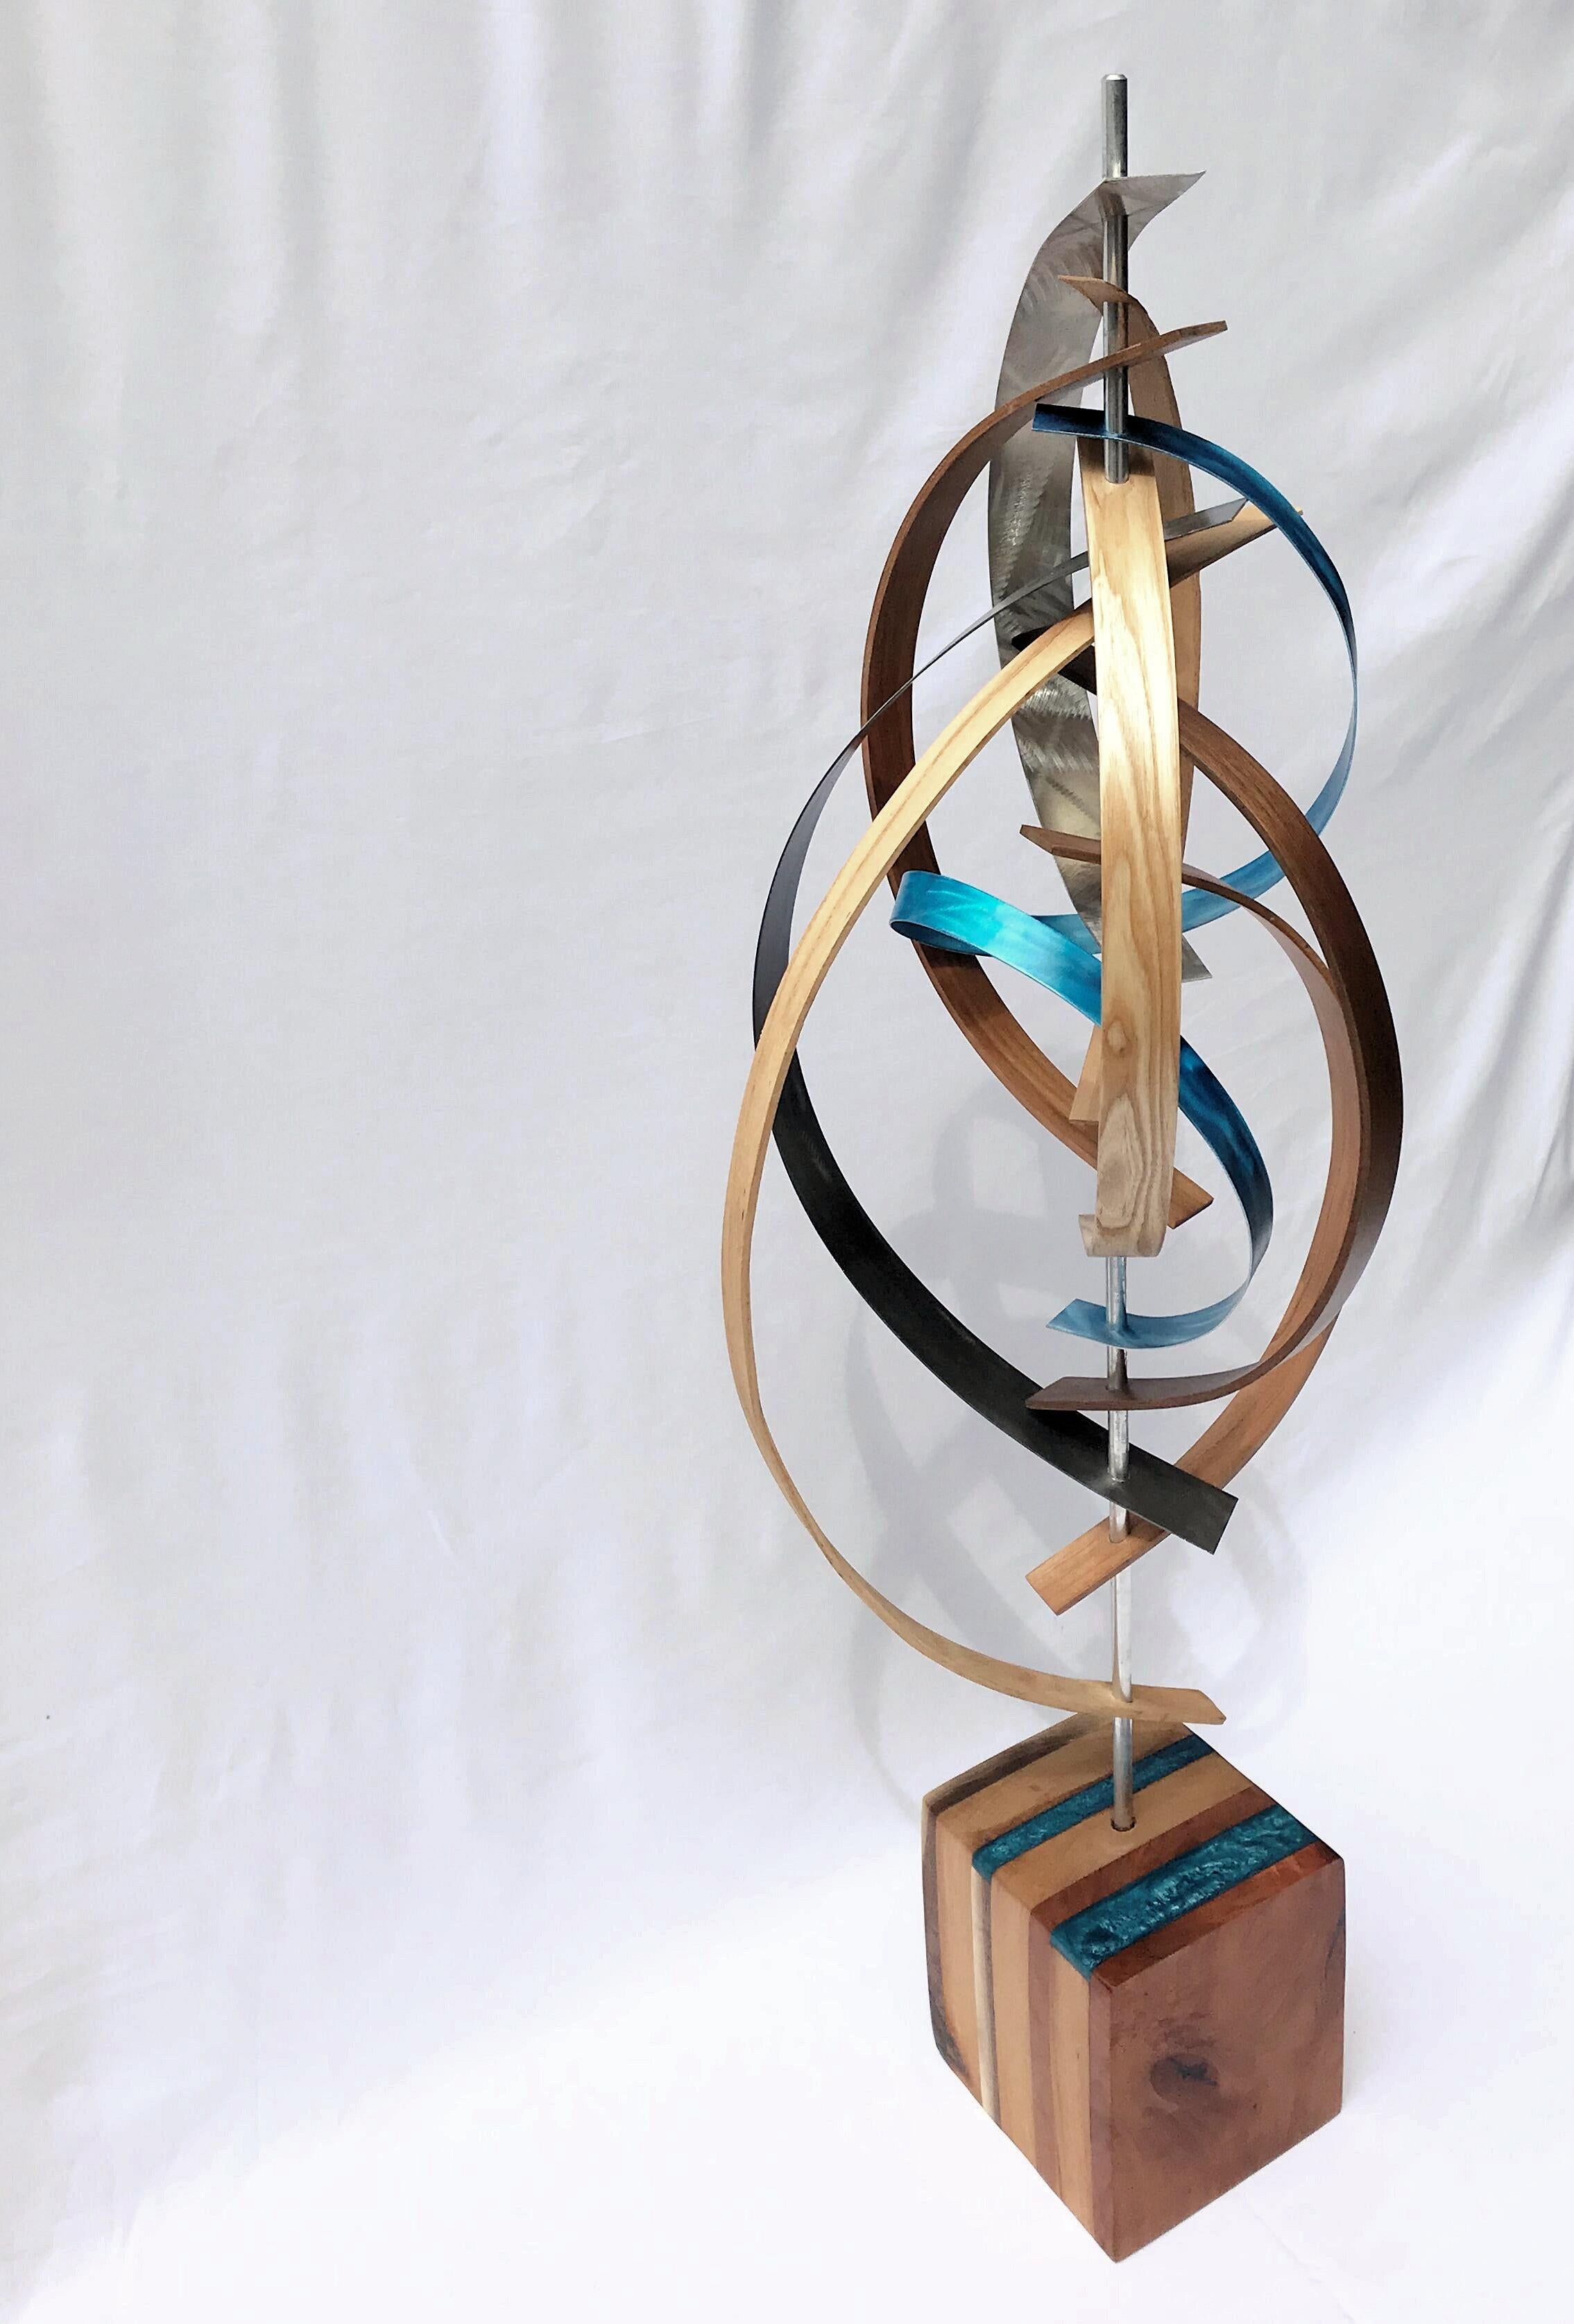 Wood and Metal Free-Standing Sculpture Mid-Century Modern Contemporary Rustic  - Brown Abstract Sculpture by Jeff Linenkugel